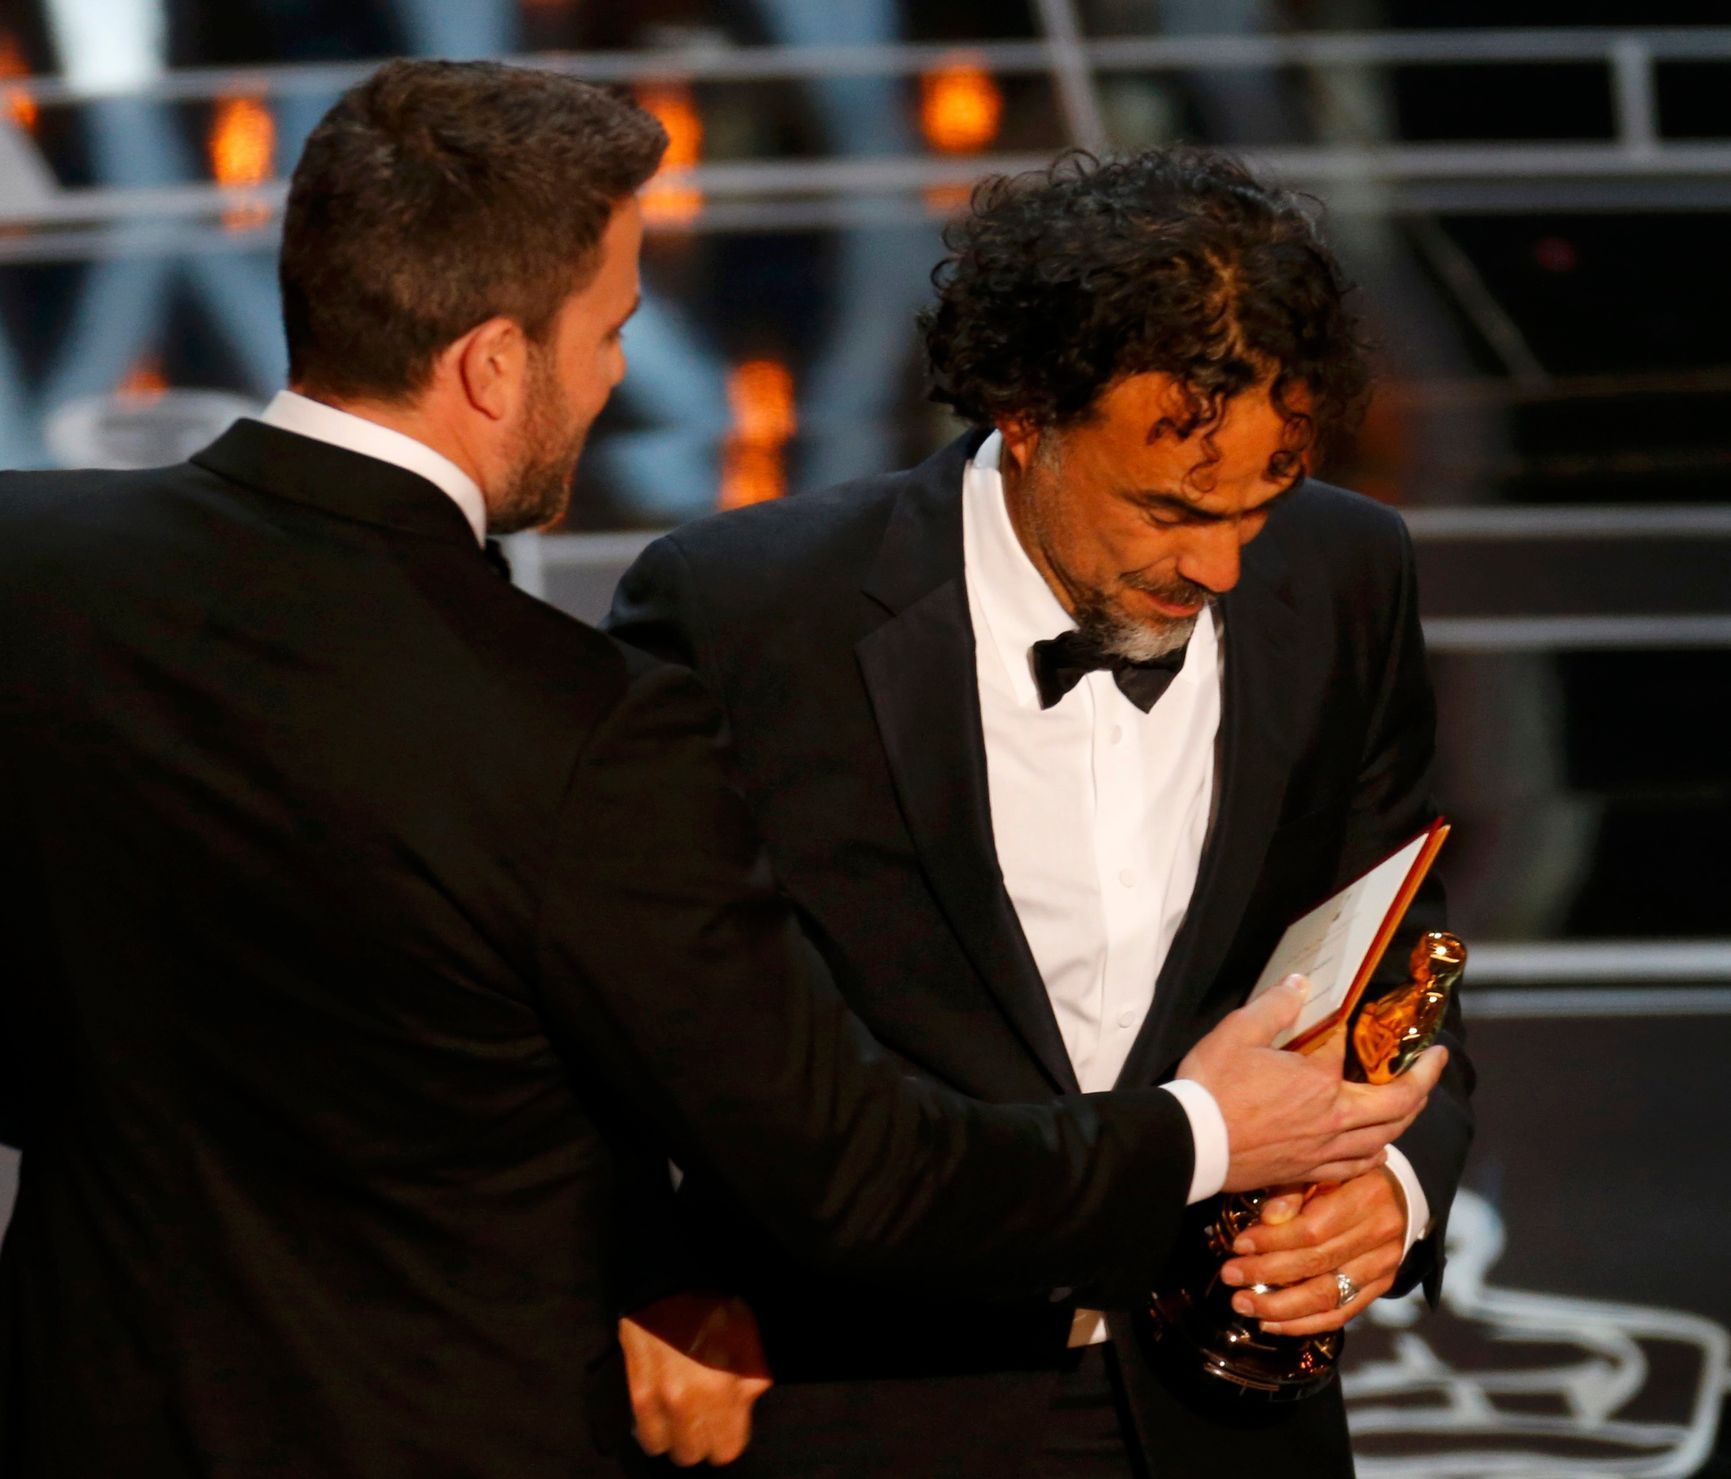 Director Alejandro Inarritu is congratulated by Ben Afflick as he accepts the Oscar for Best Director his film &quot;Birdman&quot; at the 87th Academy Awards in Hollywood, California